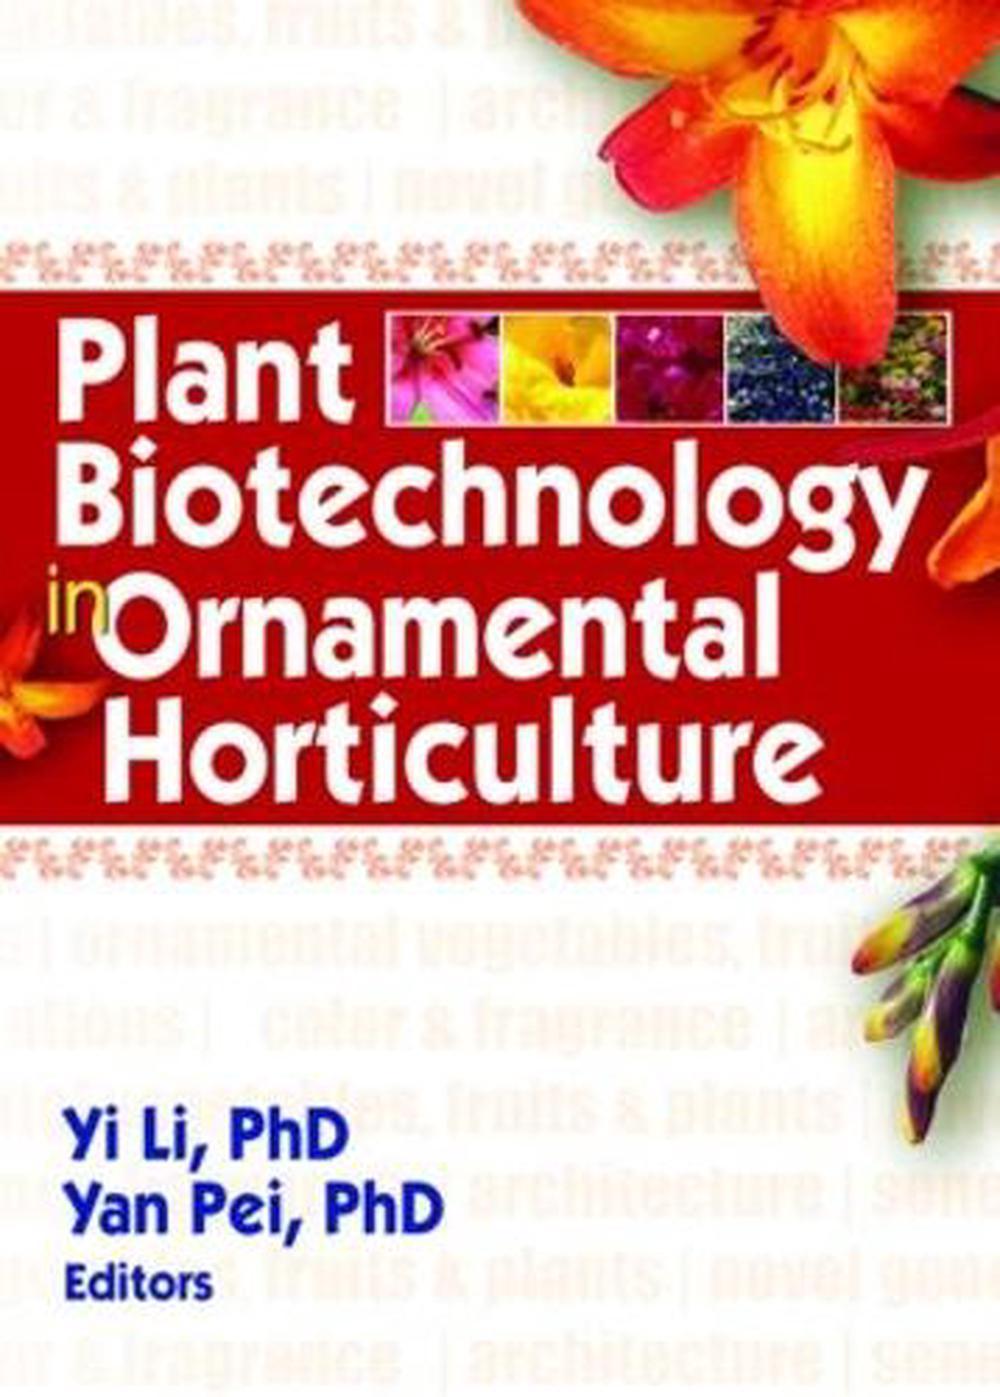 Plant Biotechnology in Ornamental Horticulture by Yi Li (English